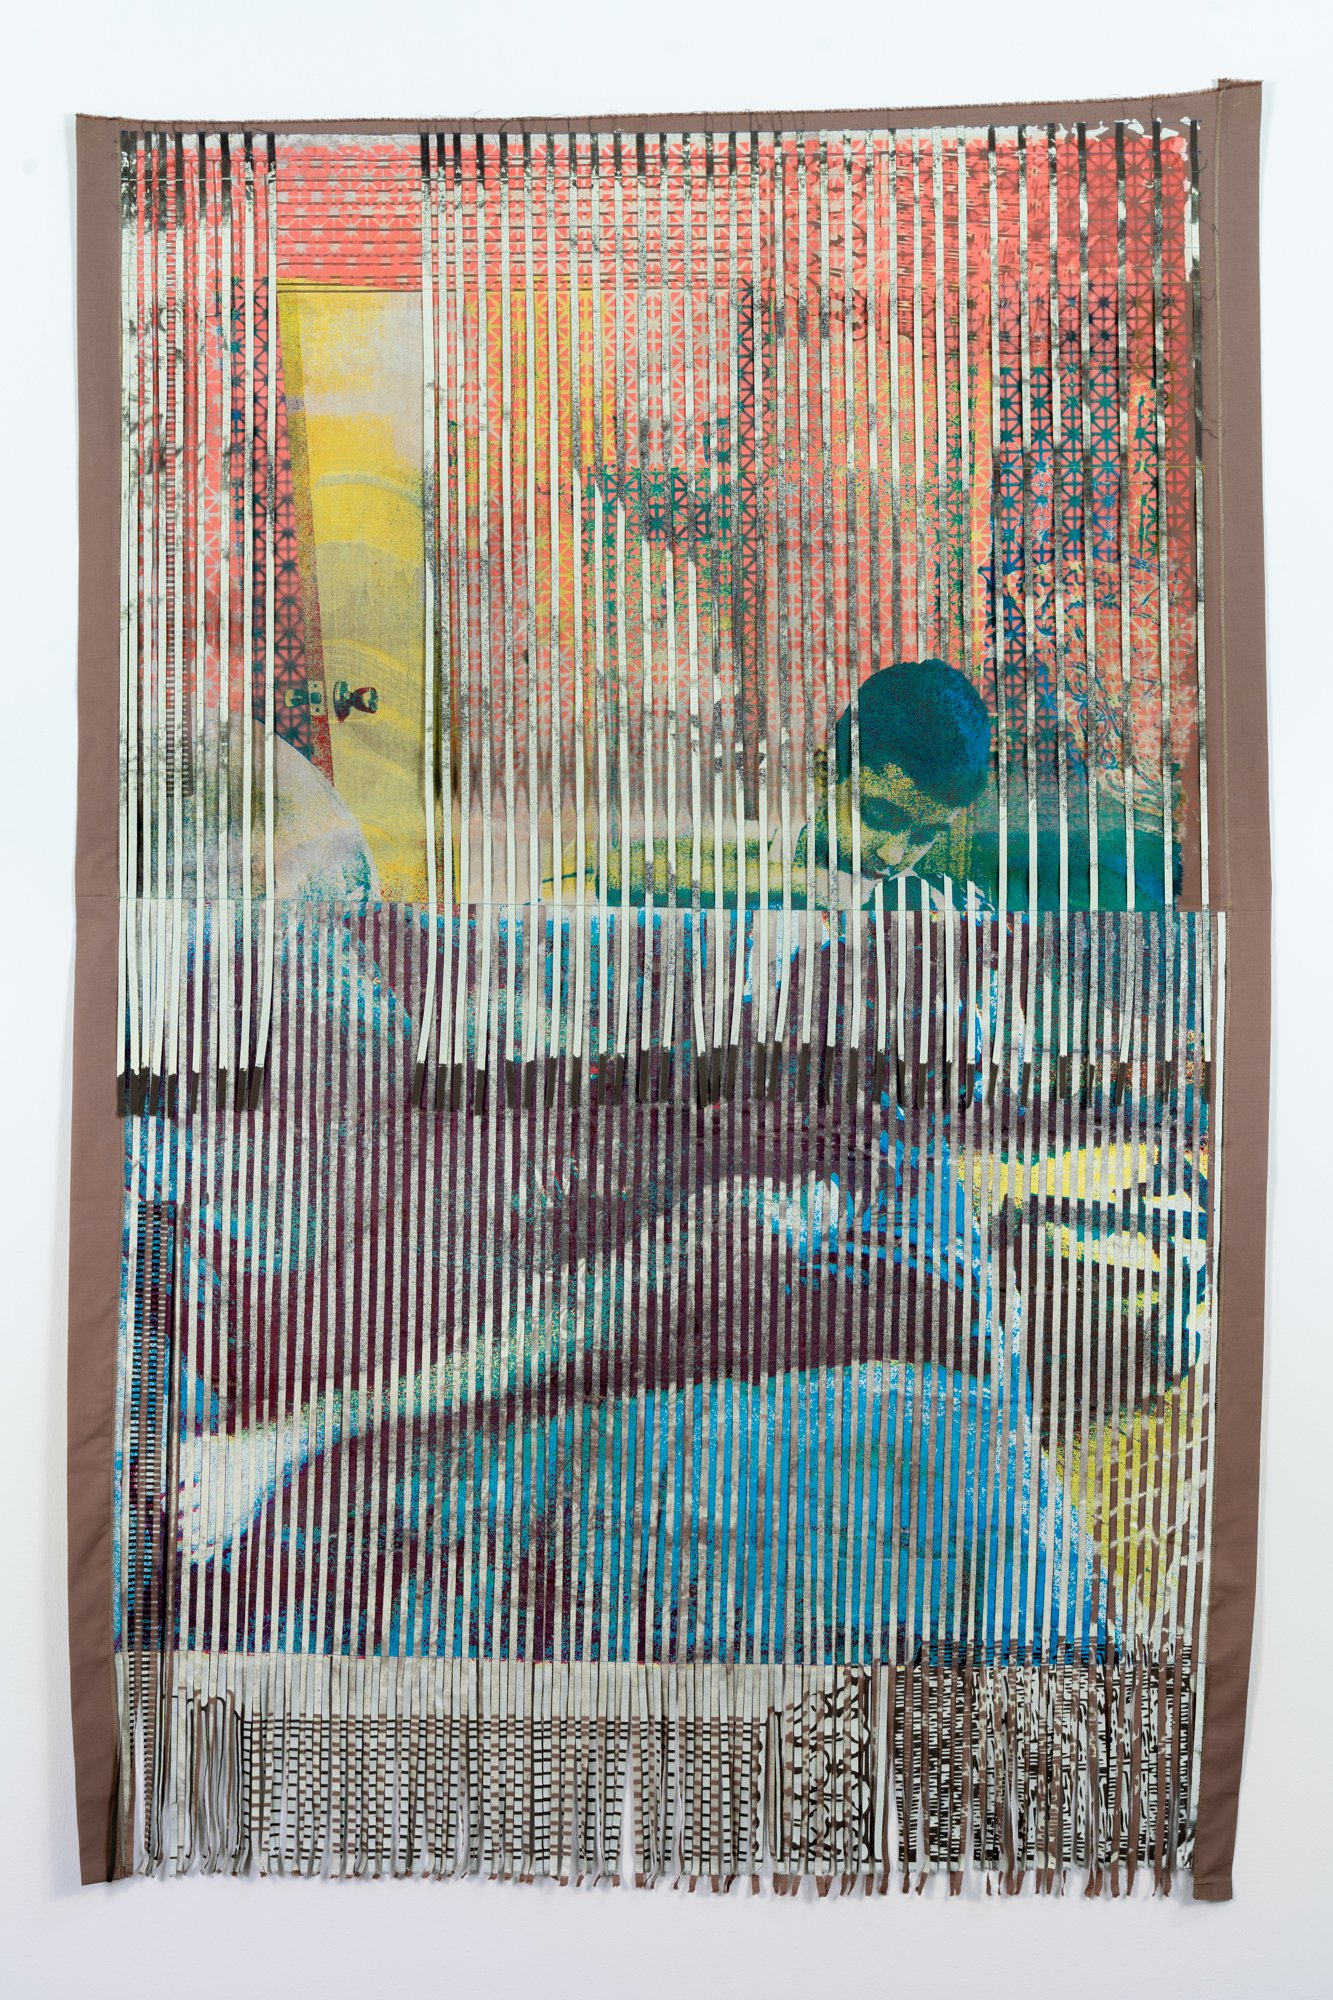    Adrian–holding on to a thread  , 2022, Quilted strips of screenprinted fabric, spray painted stencil, 60” x 40”  